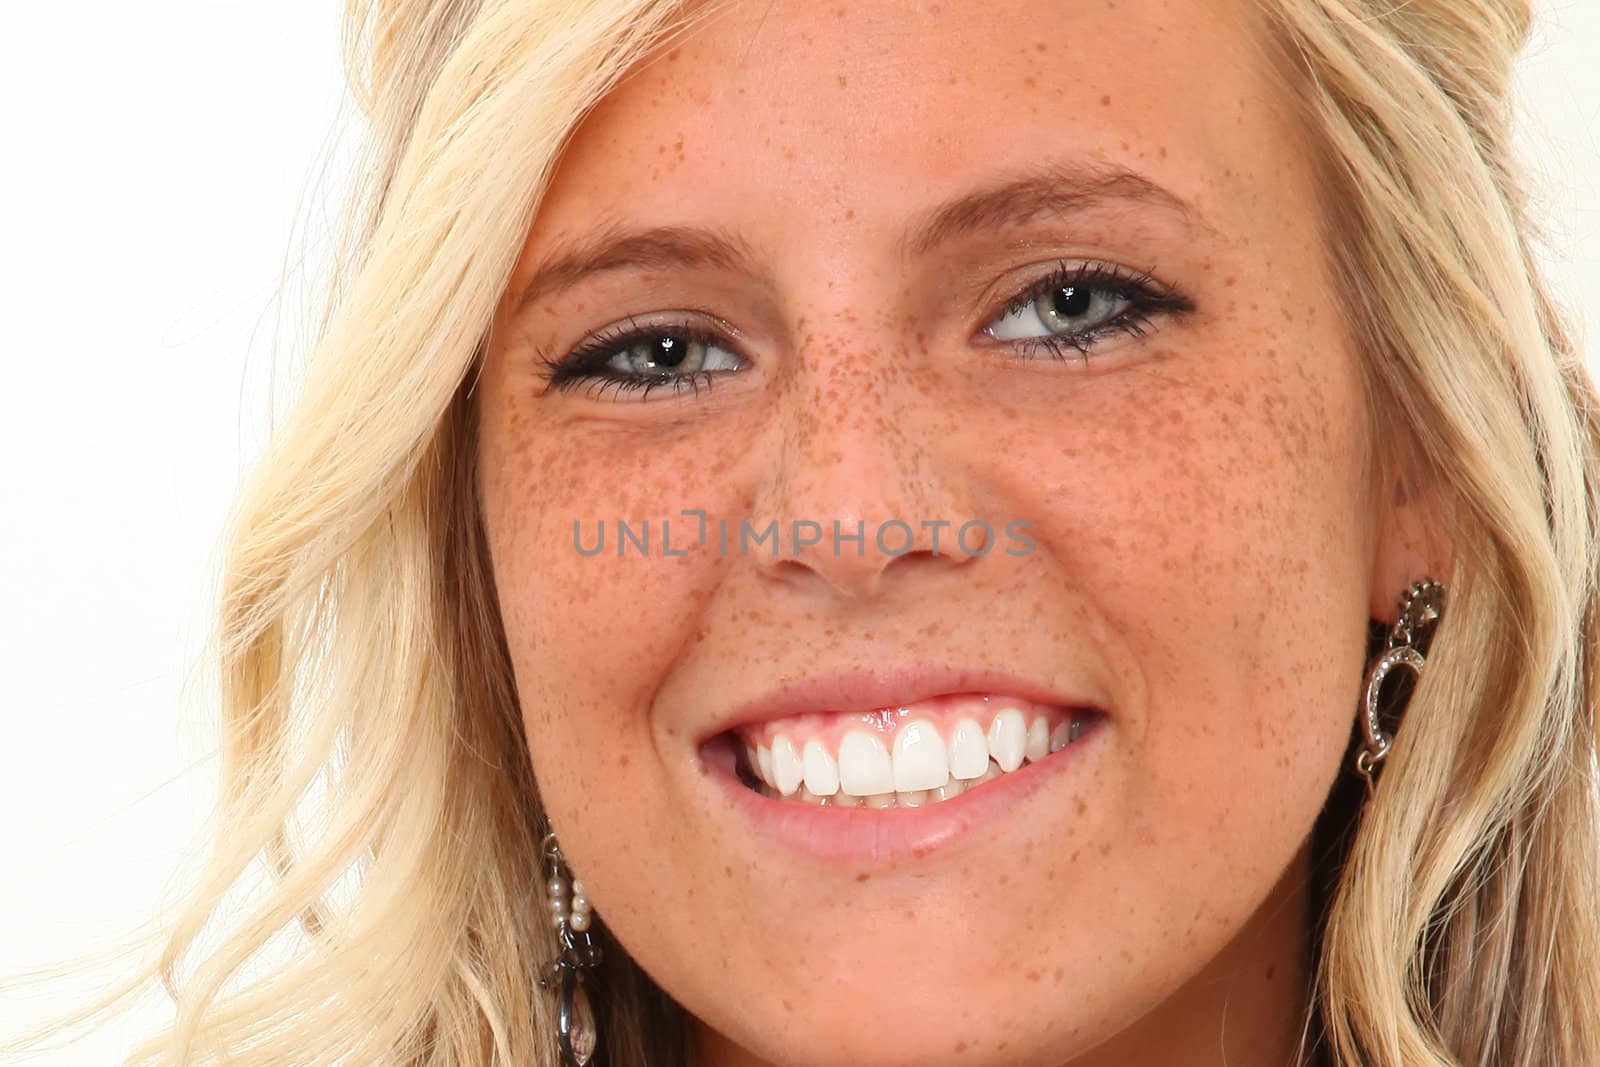 Beautiful young woman with perfect teeth smiling over white background.  Close up.